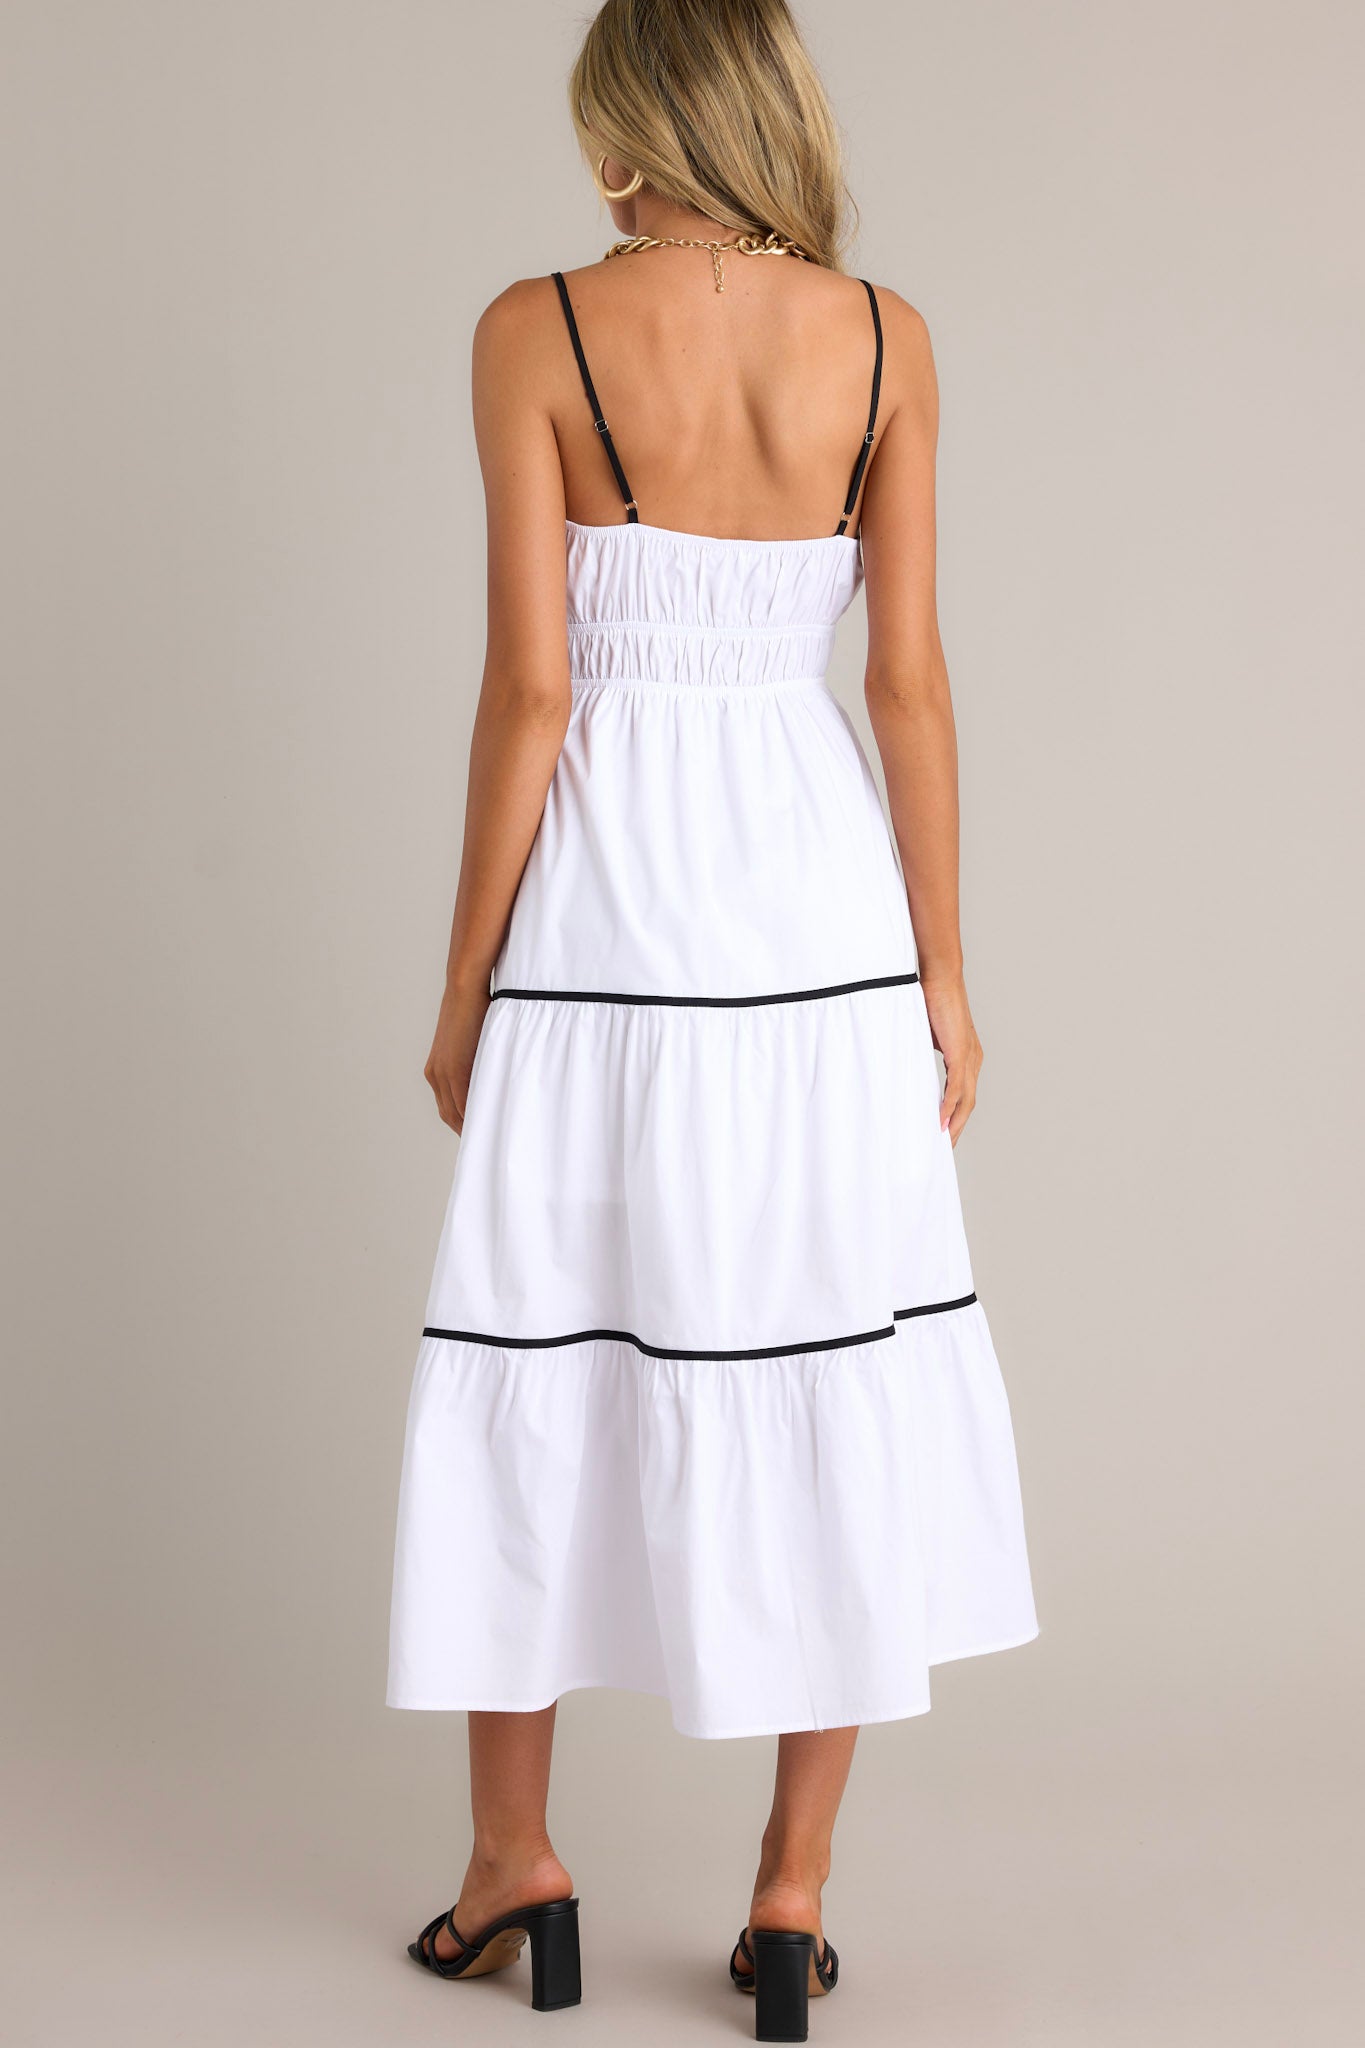 Back view of a white midi dress highlighting the thin adjustable straps, elastic waist, contrasting tiers, and overall fit.